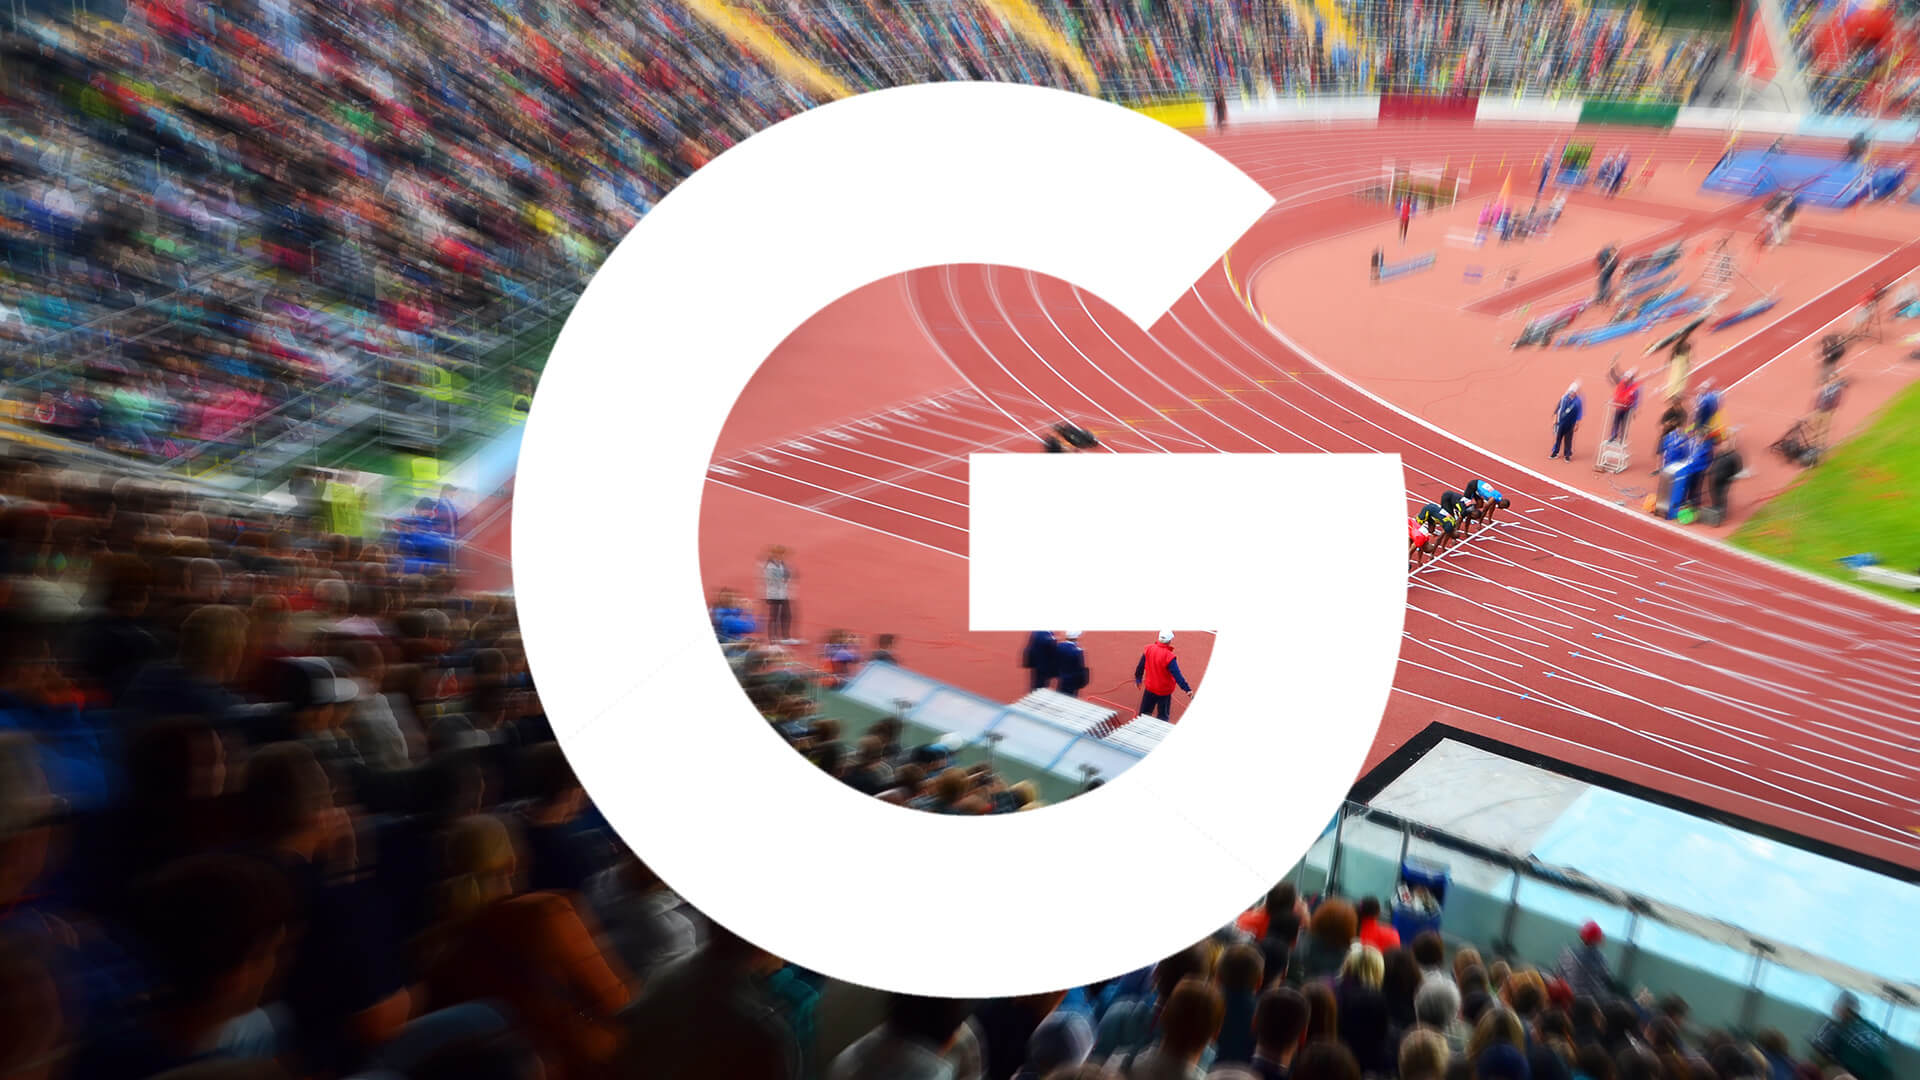 Google Search helps users find live sport games, linear TV shows